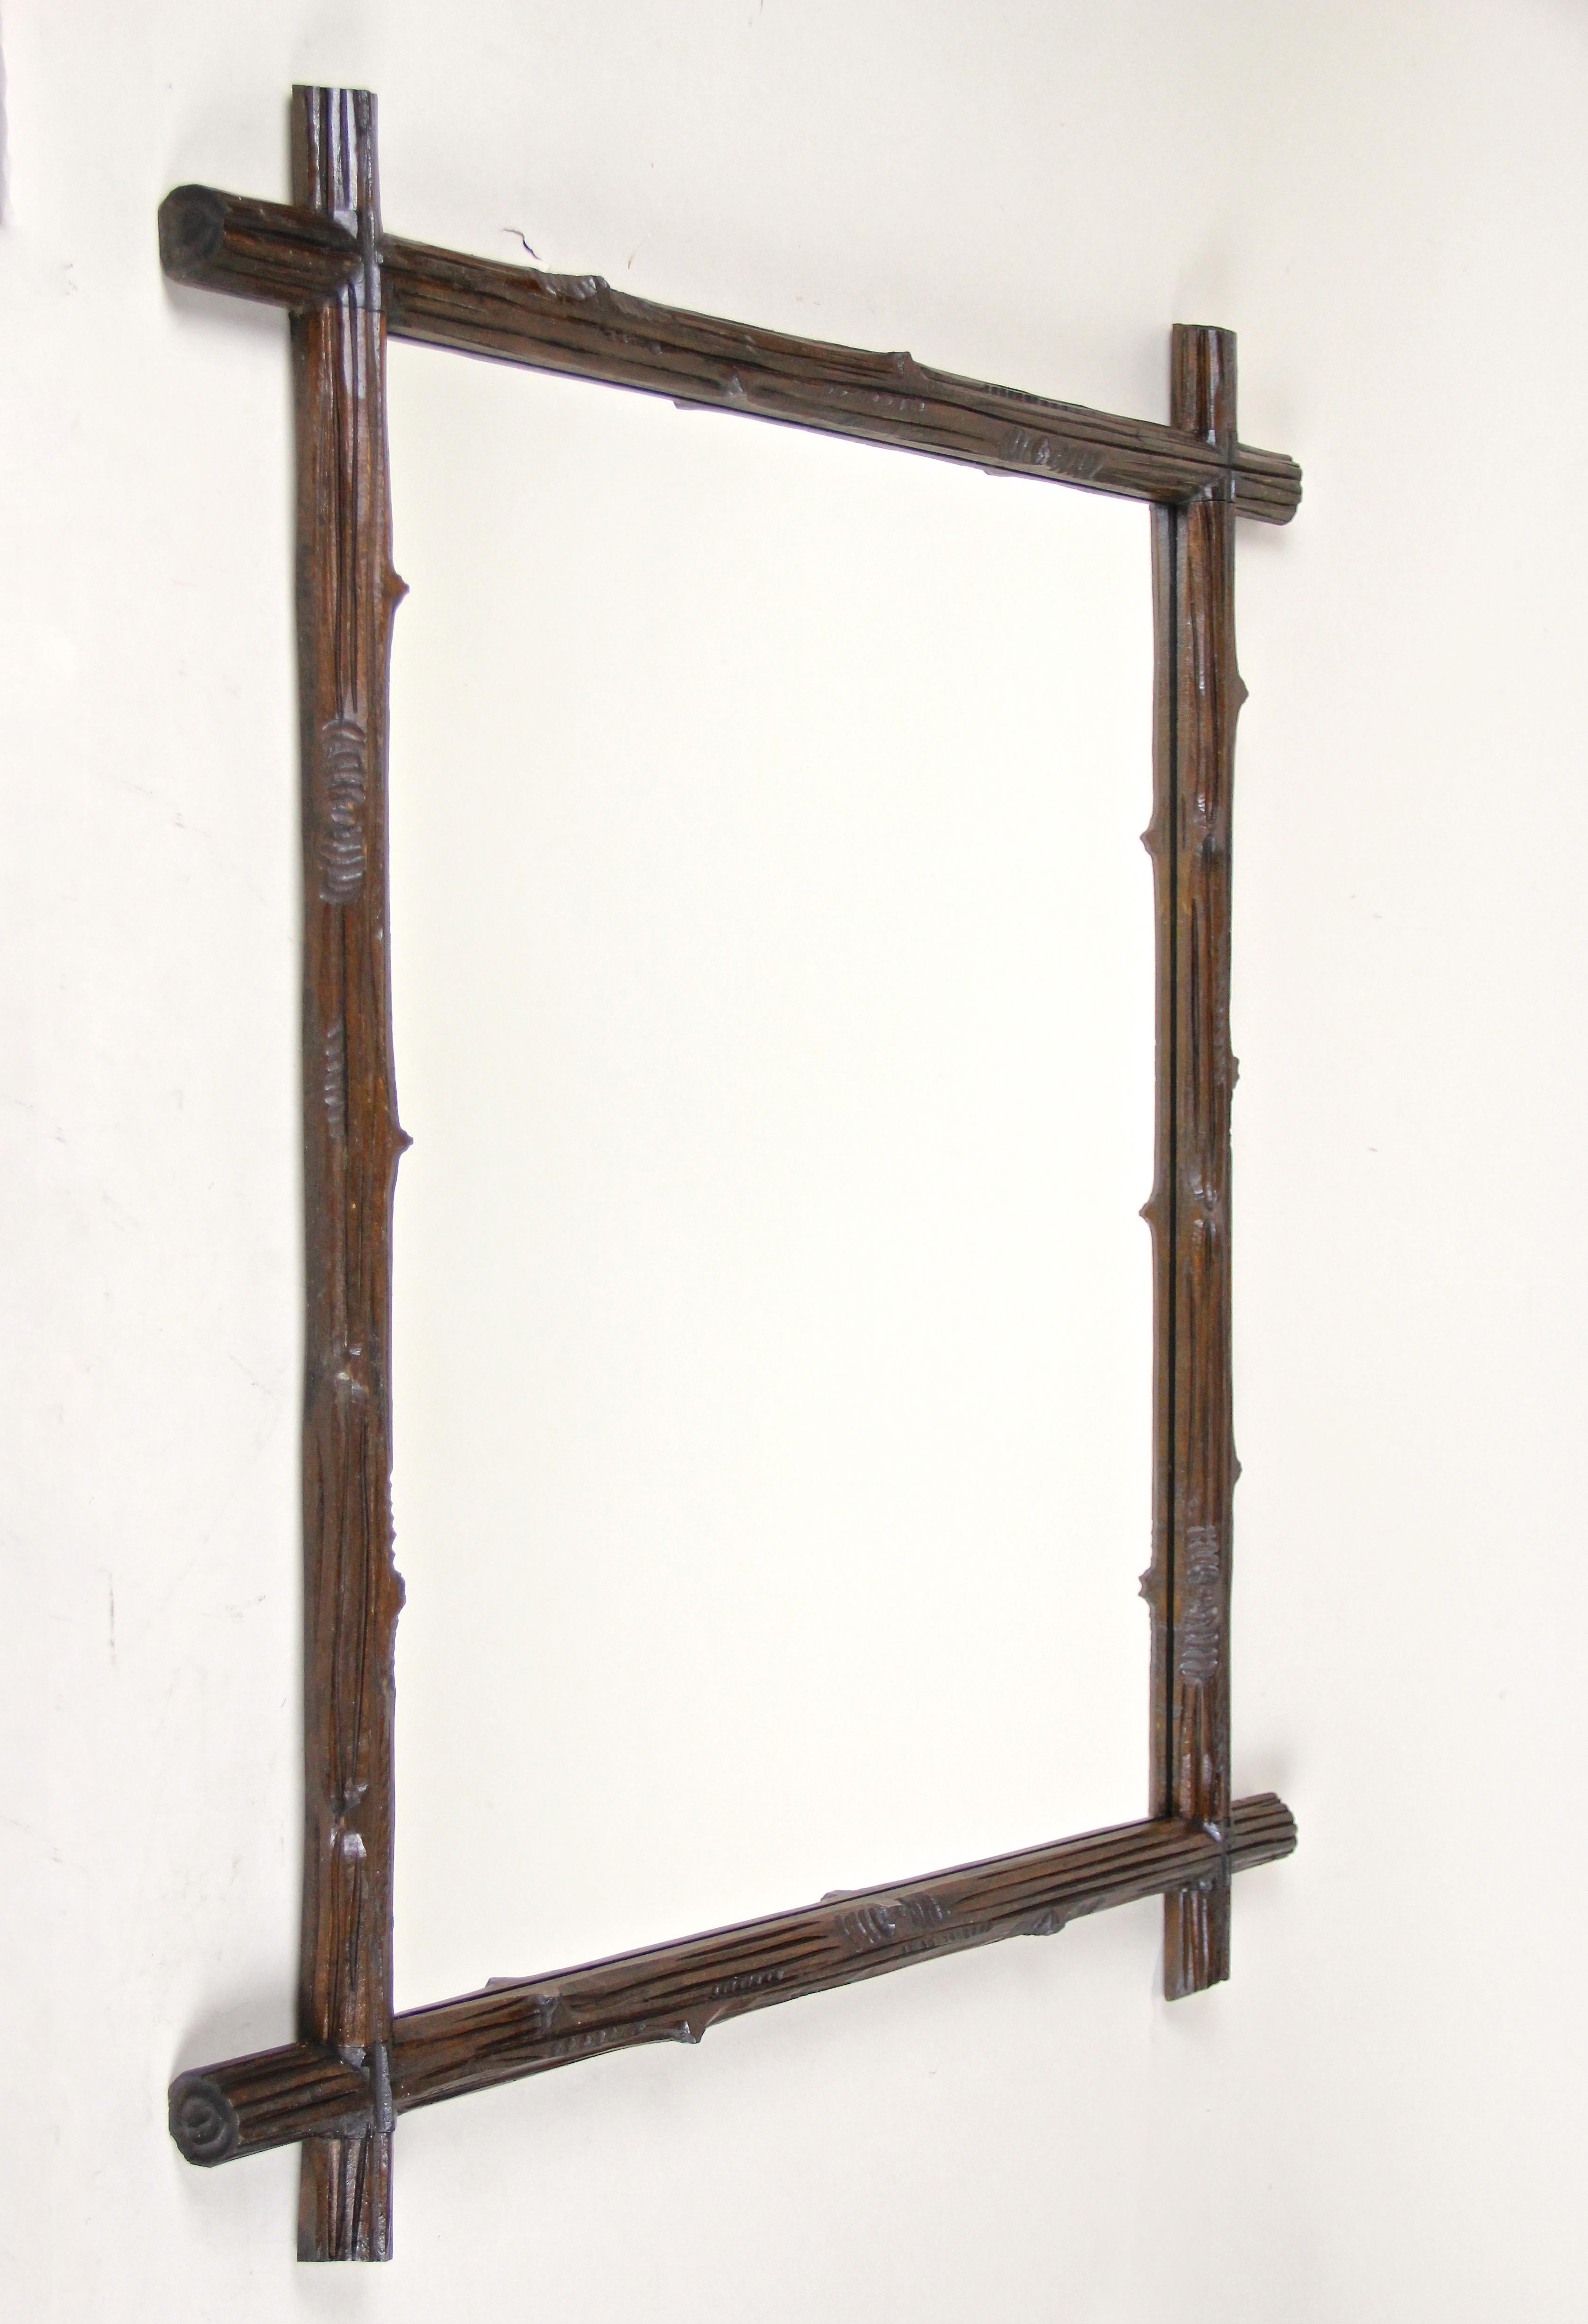 Wonderful pair of Black Forest wall mirrors out of Austria, circa 1880. These unique rustic wooden wall mirrors have been artfully hand carved out of basswood. The frames with protruding corners and a very own 